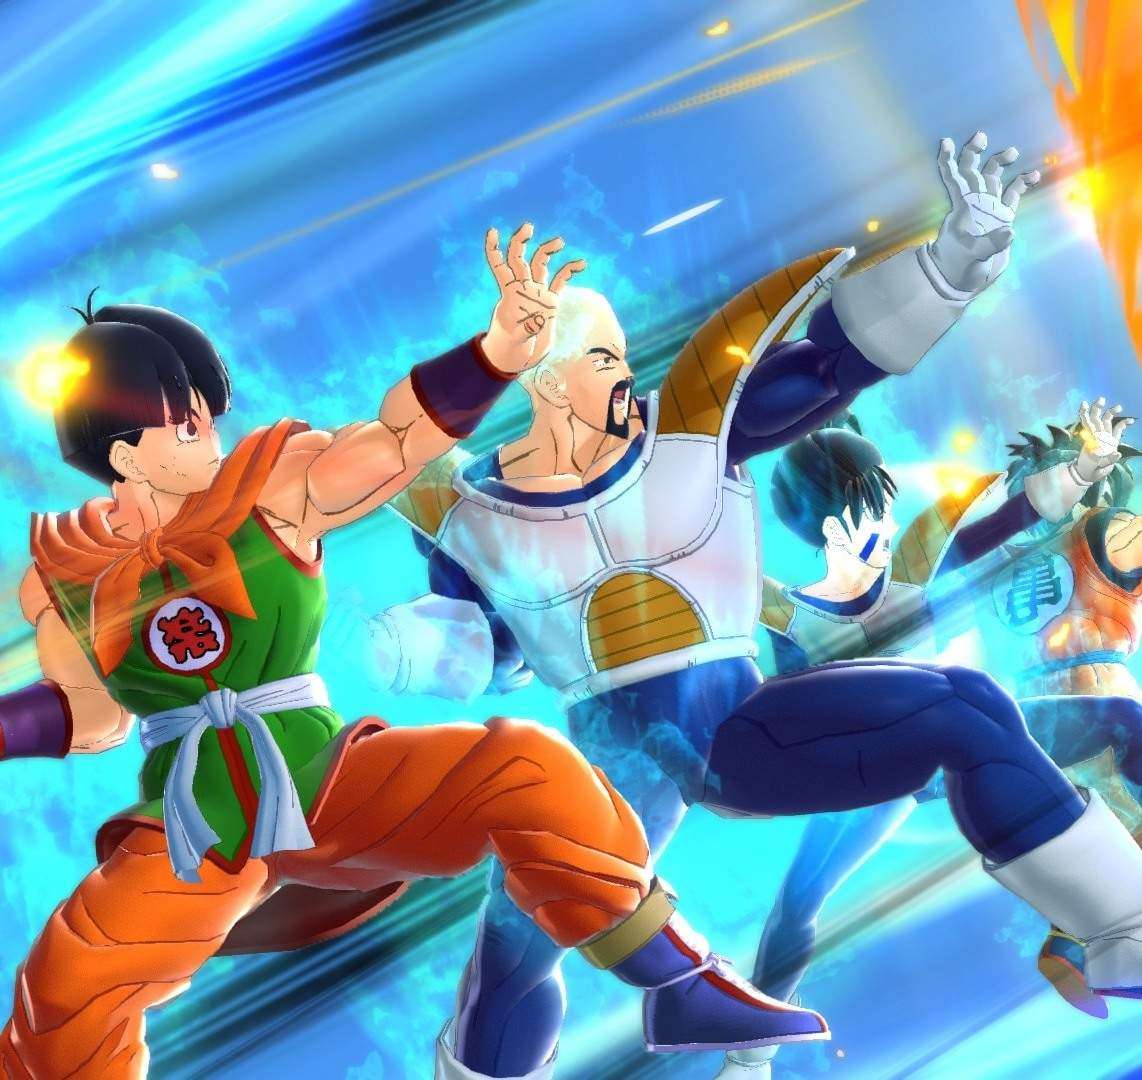 How to start DRAGON BALL: THE BREAKERS - CBT Guide